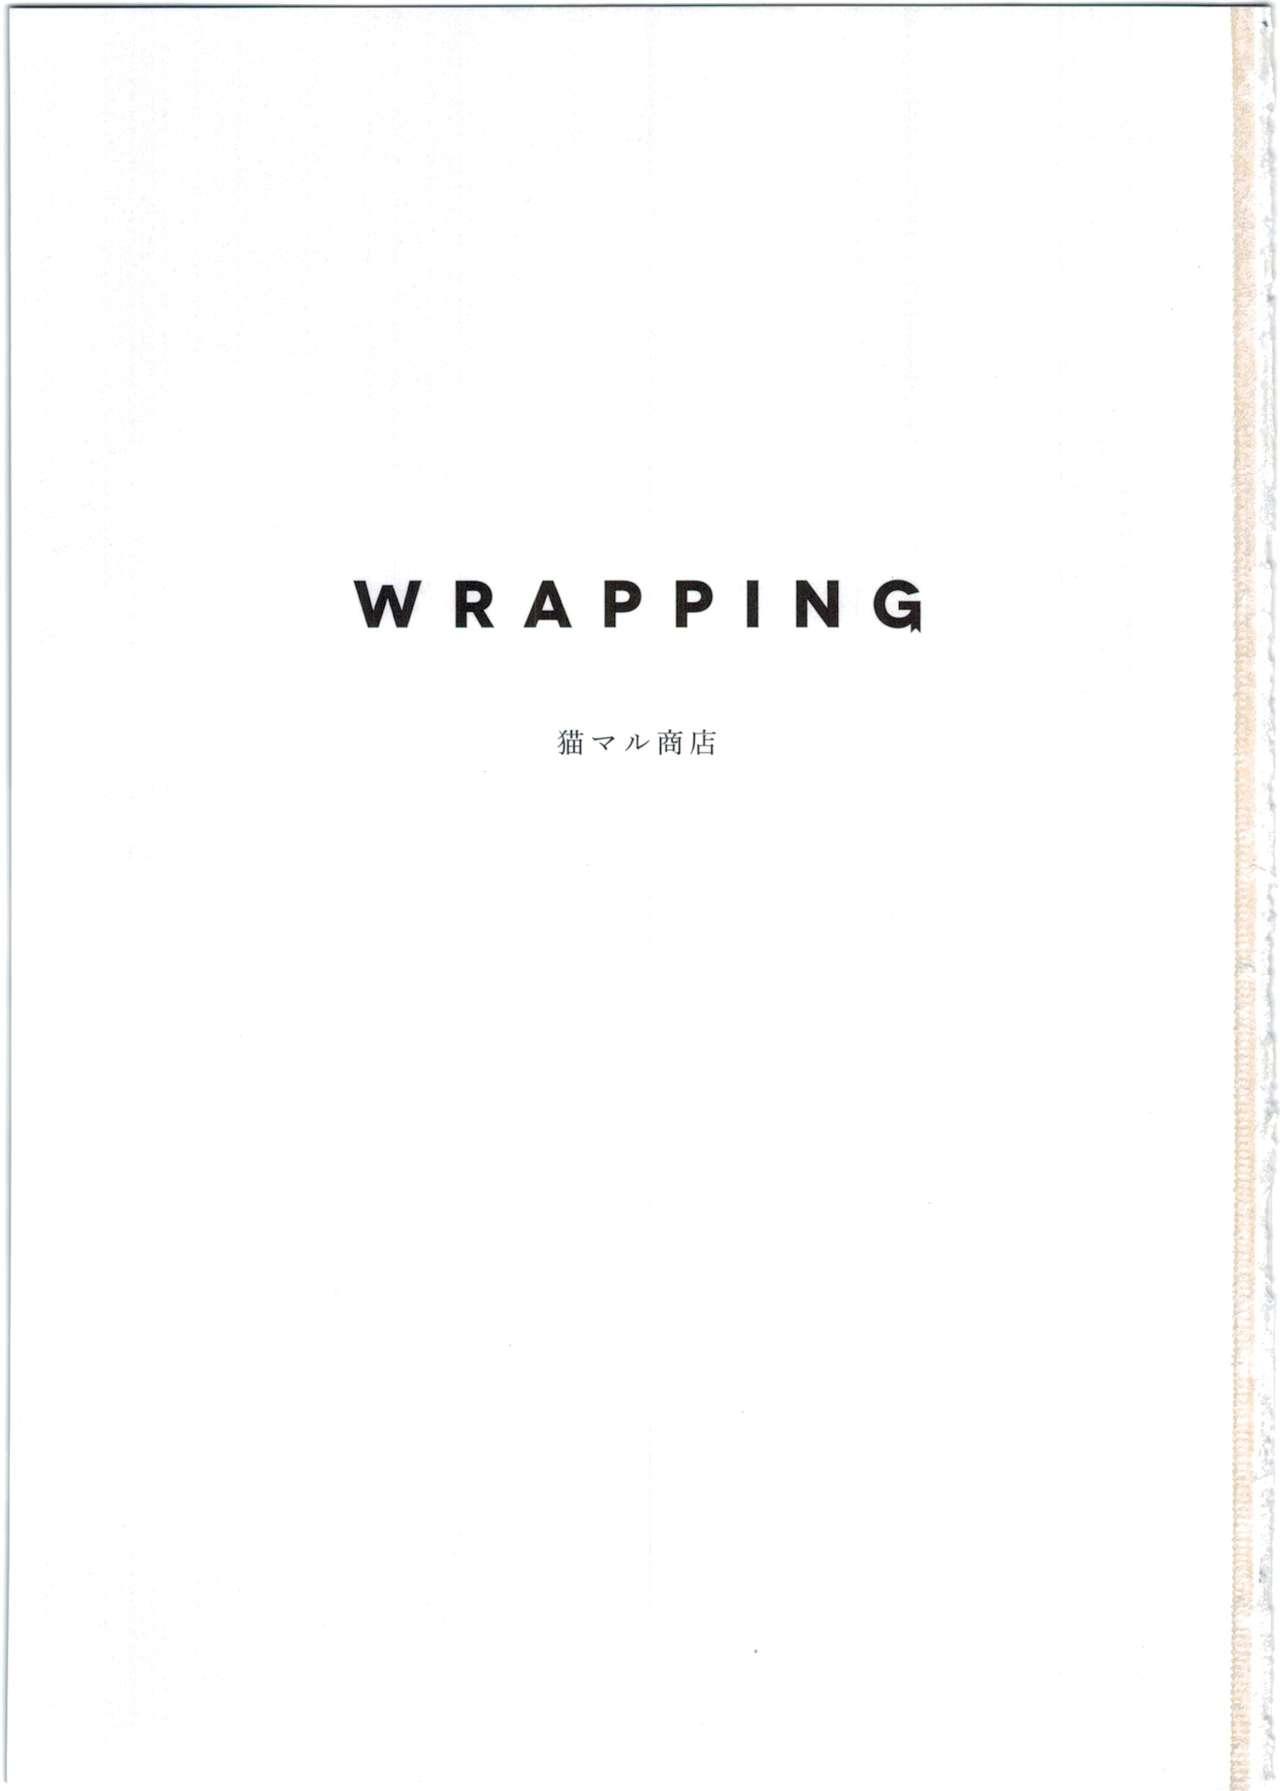 WRAPPING 2